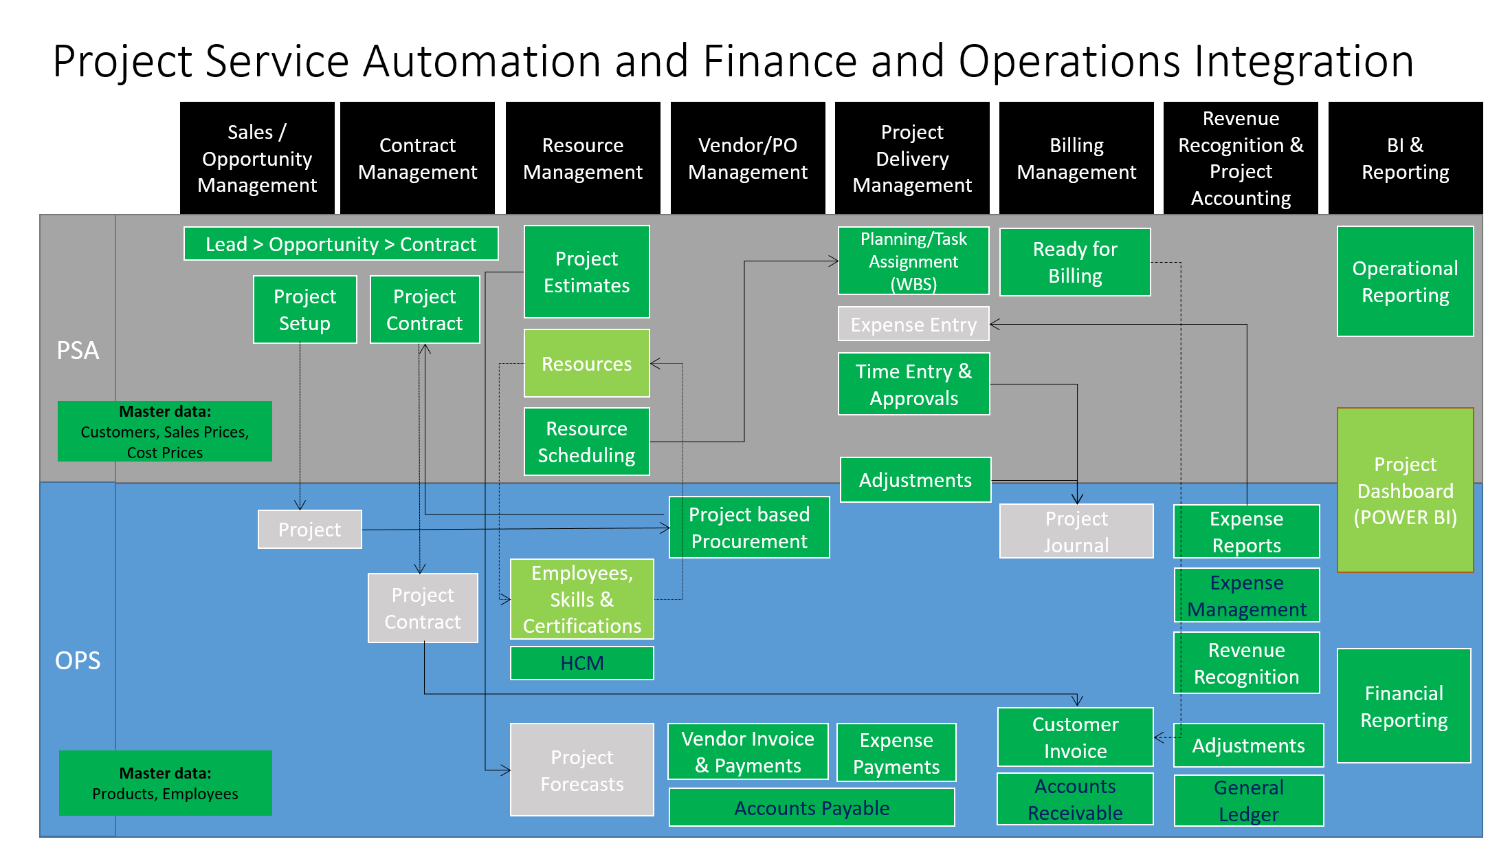 A diagram showing Dynamics 365 for Project Service Automation and Dynamics 365 for Finance and Operations integration